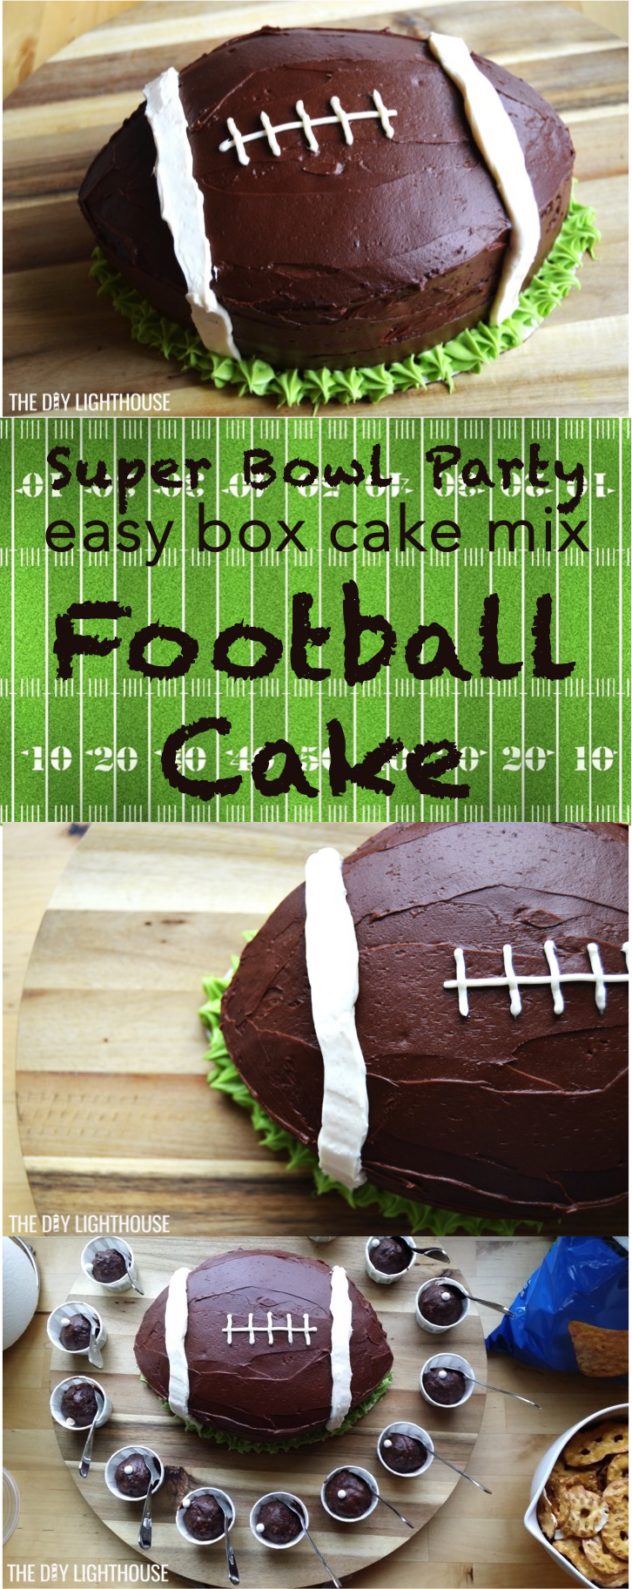 Football Buttercream Cake — Cakes by Clair - Cake maker North Wales,  Llangefni Wedding Cake